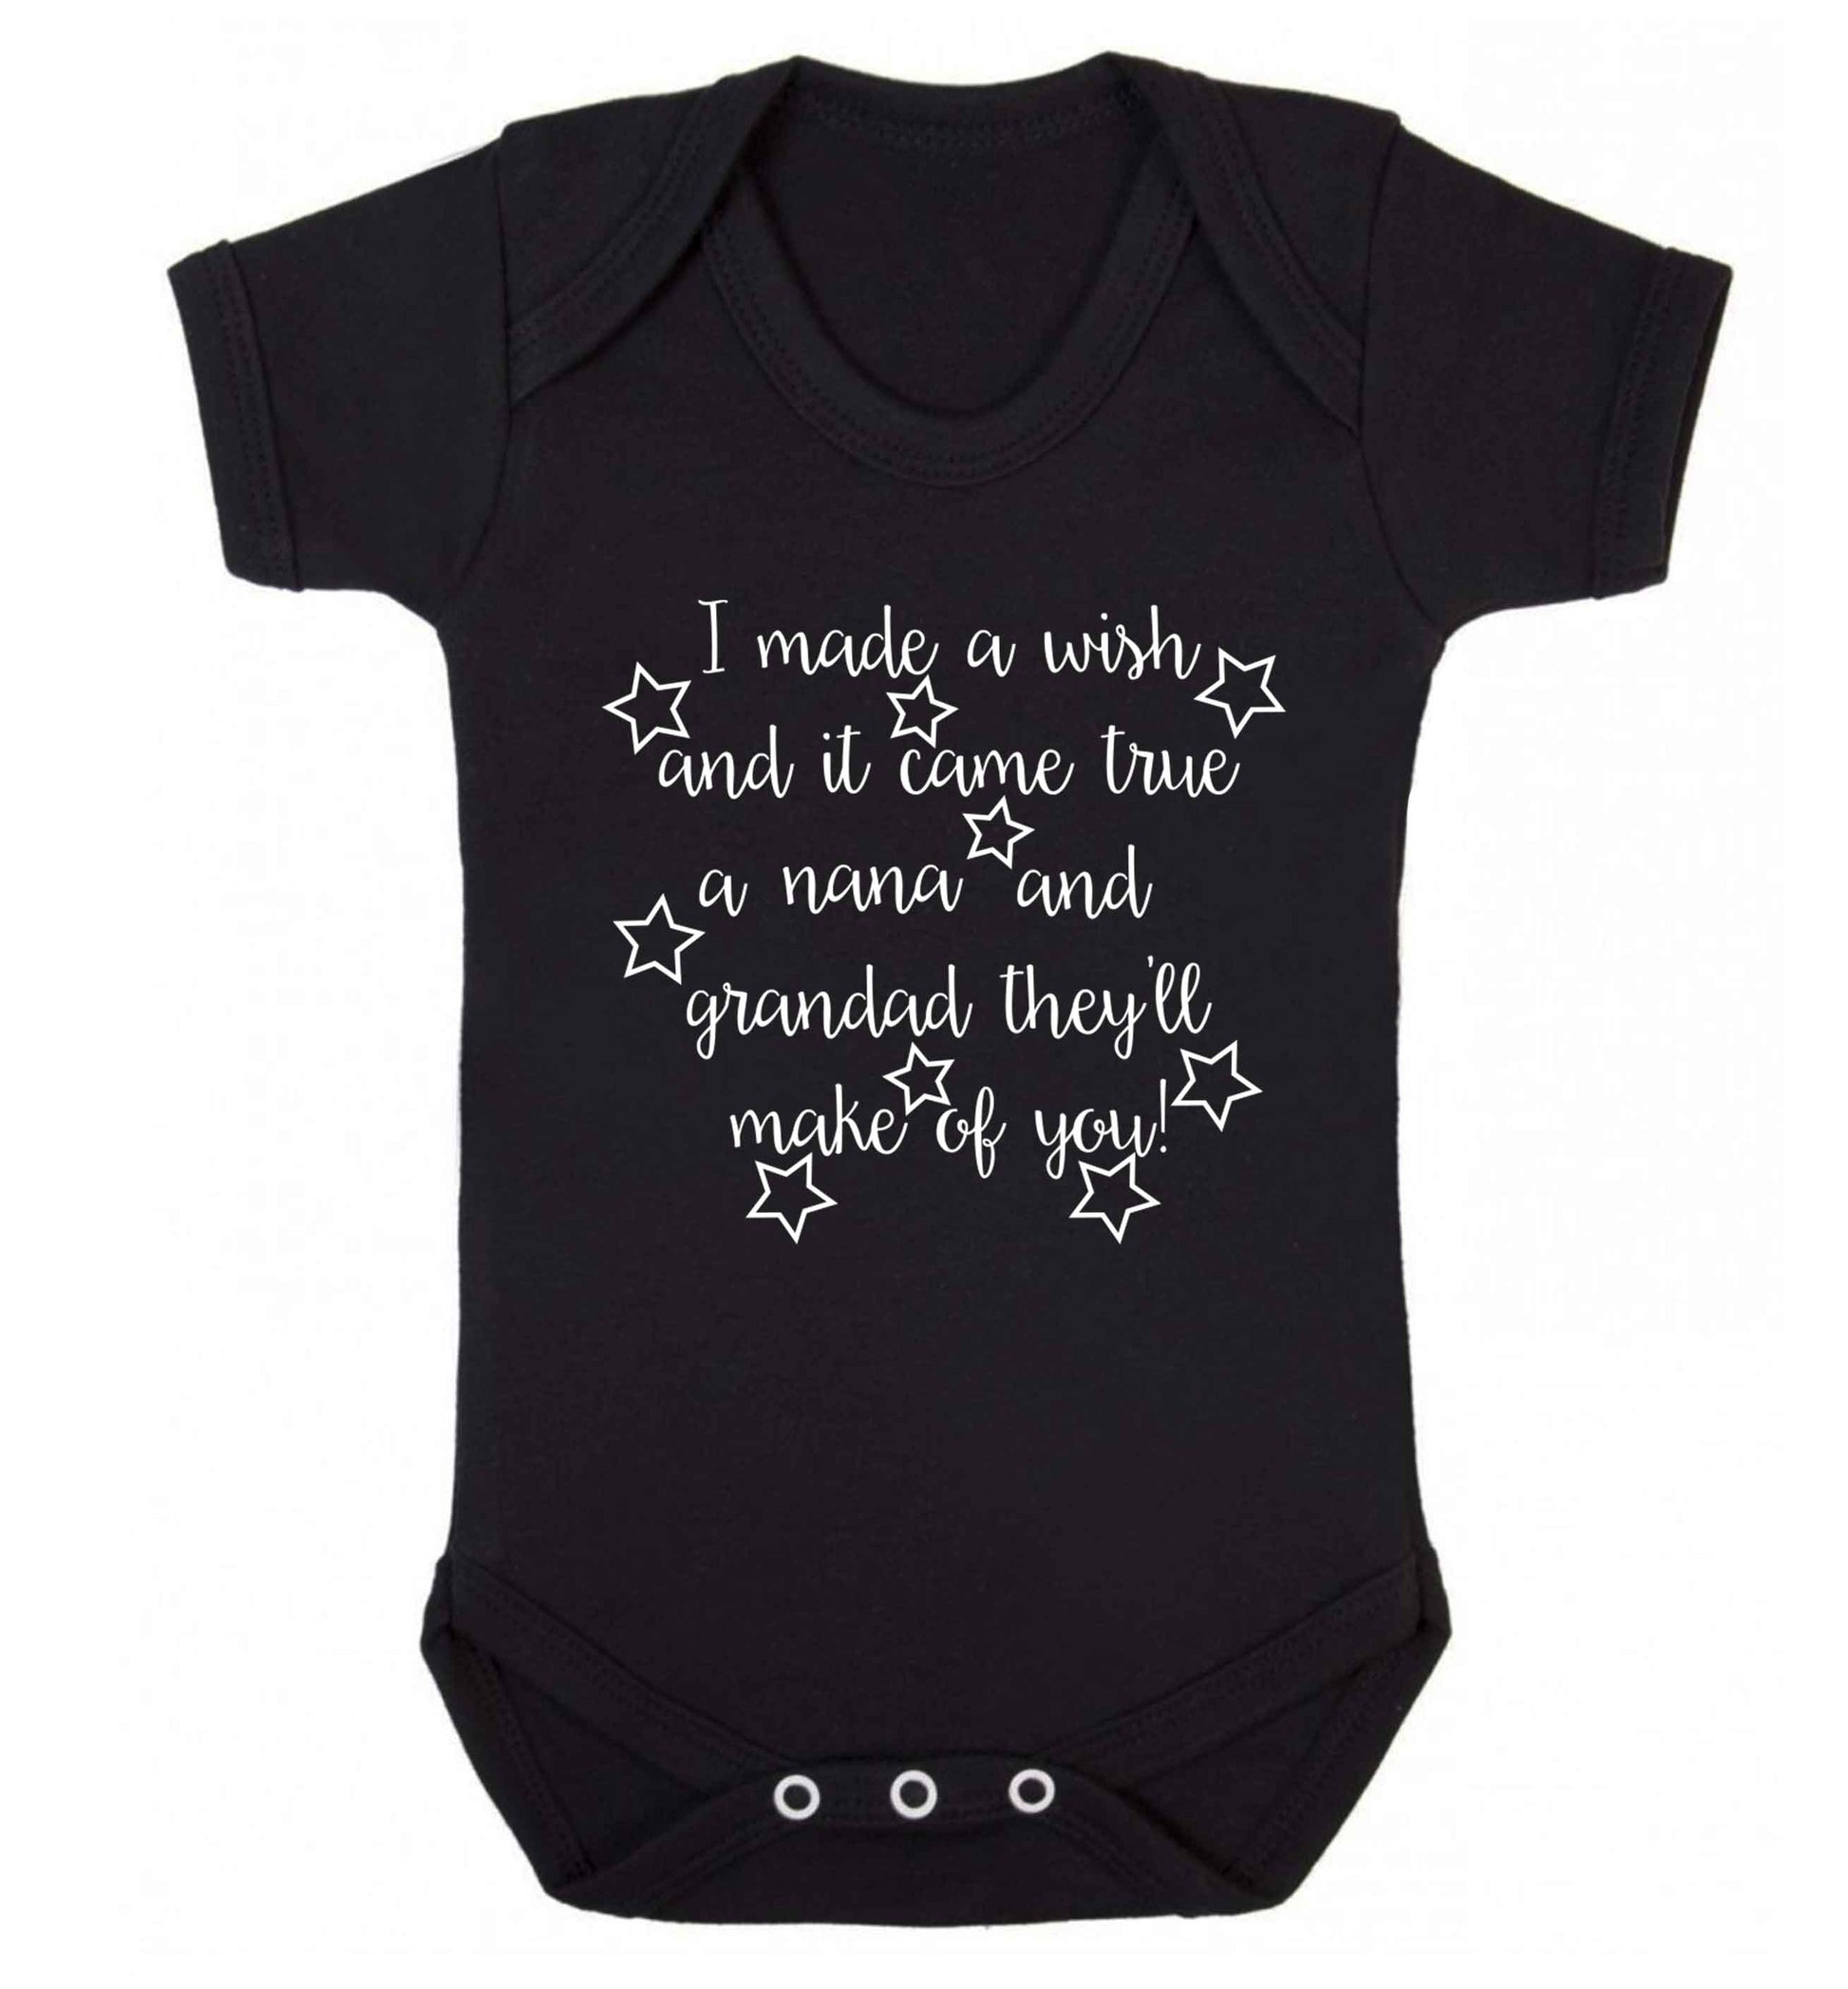 I made a wish and it came true a nana and grandad they'll make of you! Baby Vest black 18-24 months